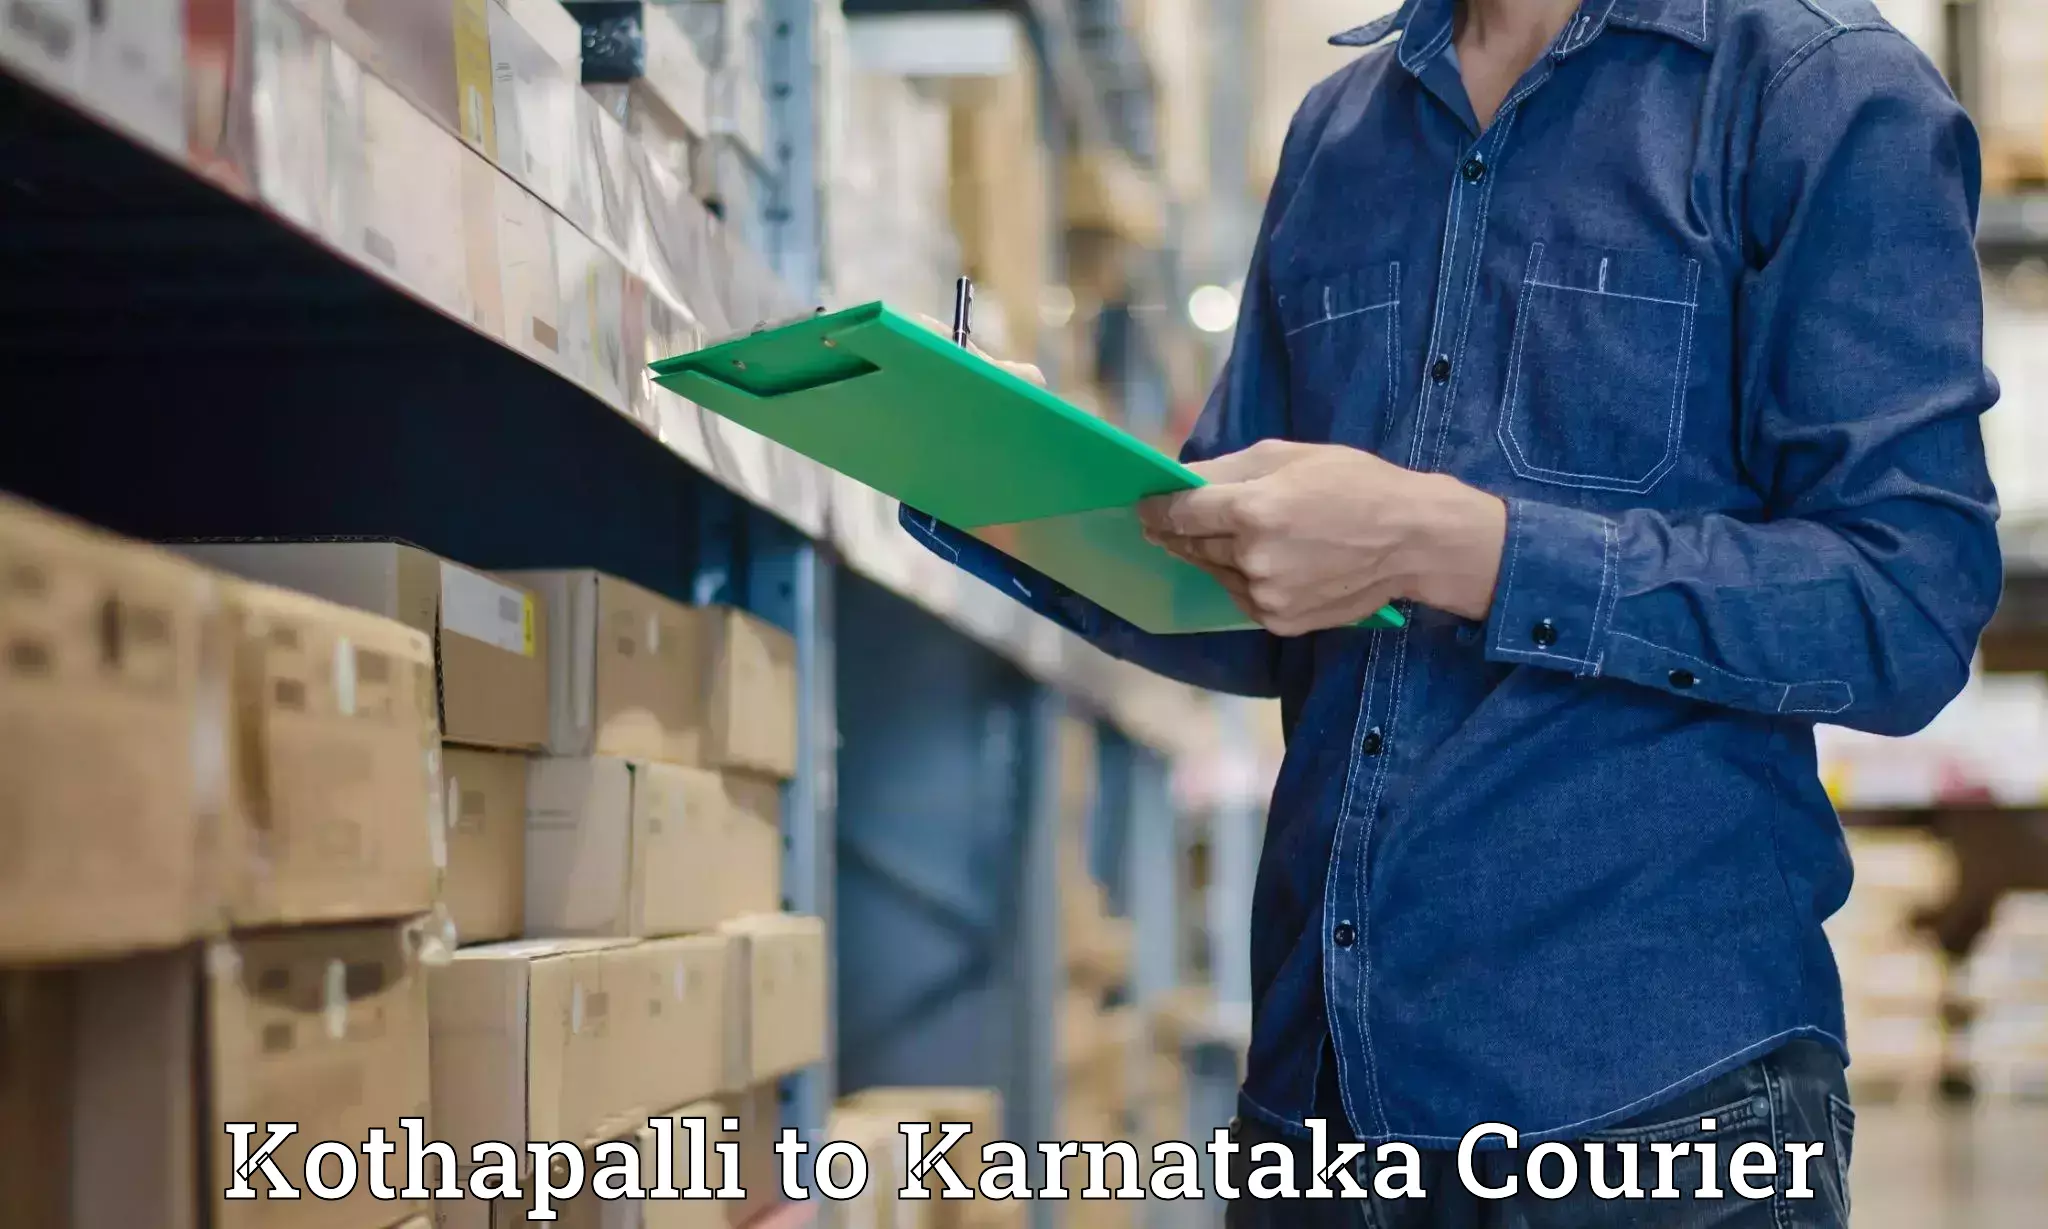 Large-scale shipping solutions Kothapalli to Anavatti